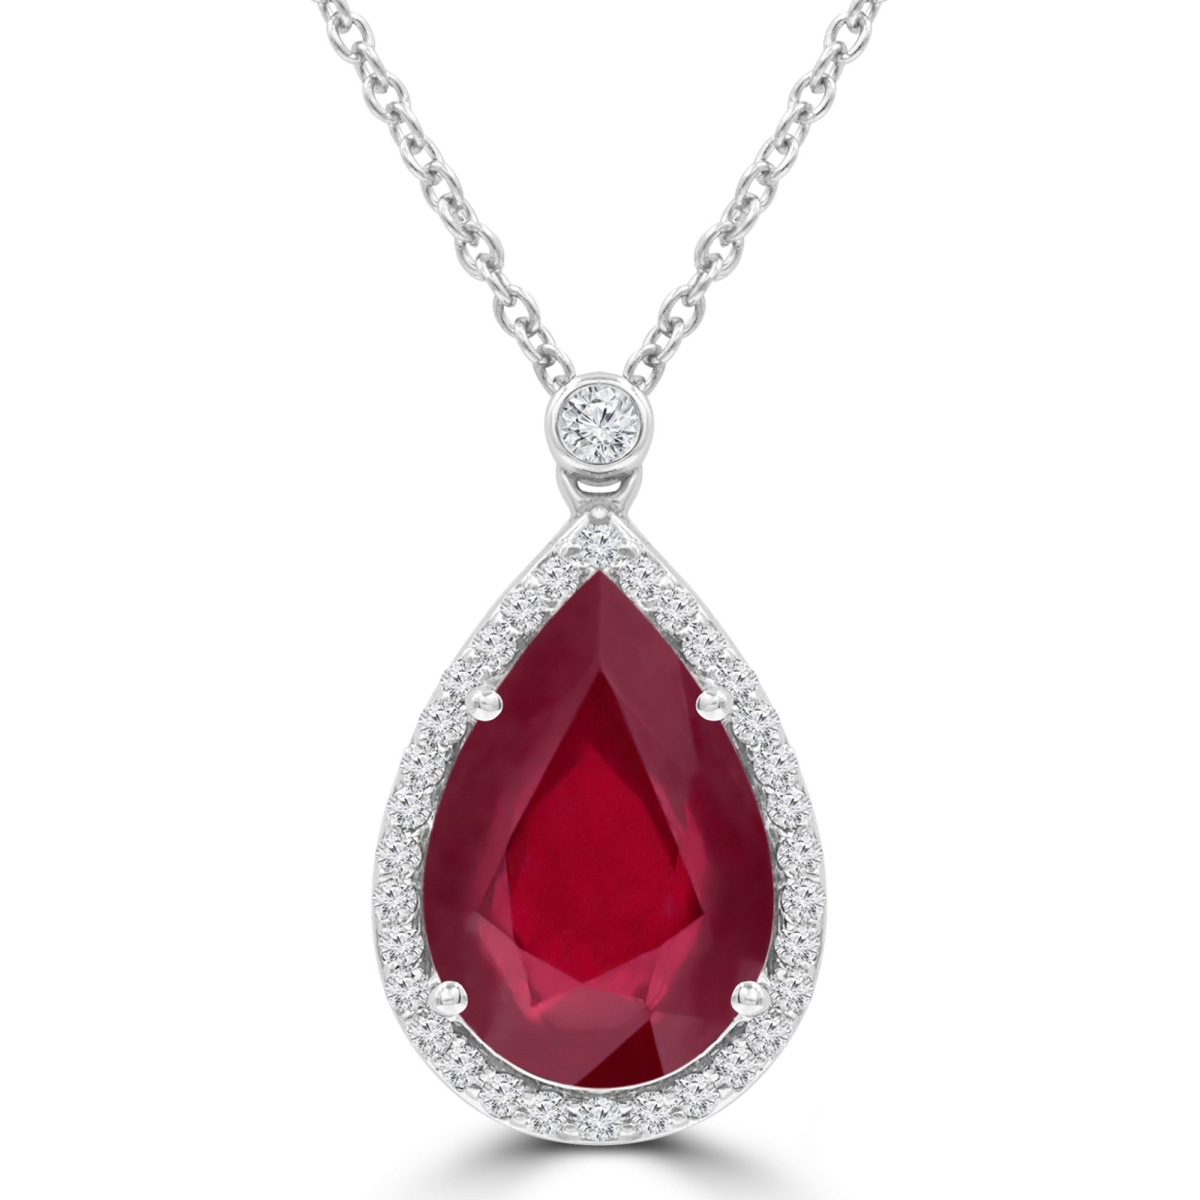 Picture of Majesty Diamonds MDR220176 4.2 CTW Pear Red Ruby Pear Halo Pendant Necklace in 14K White Gold